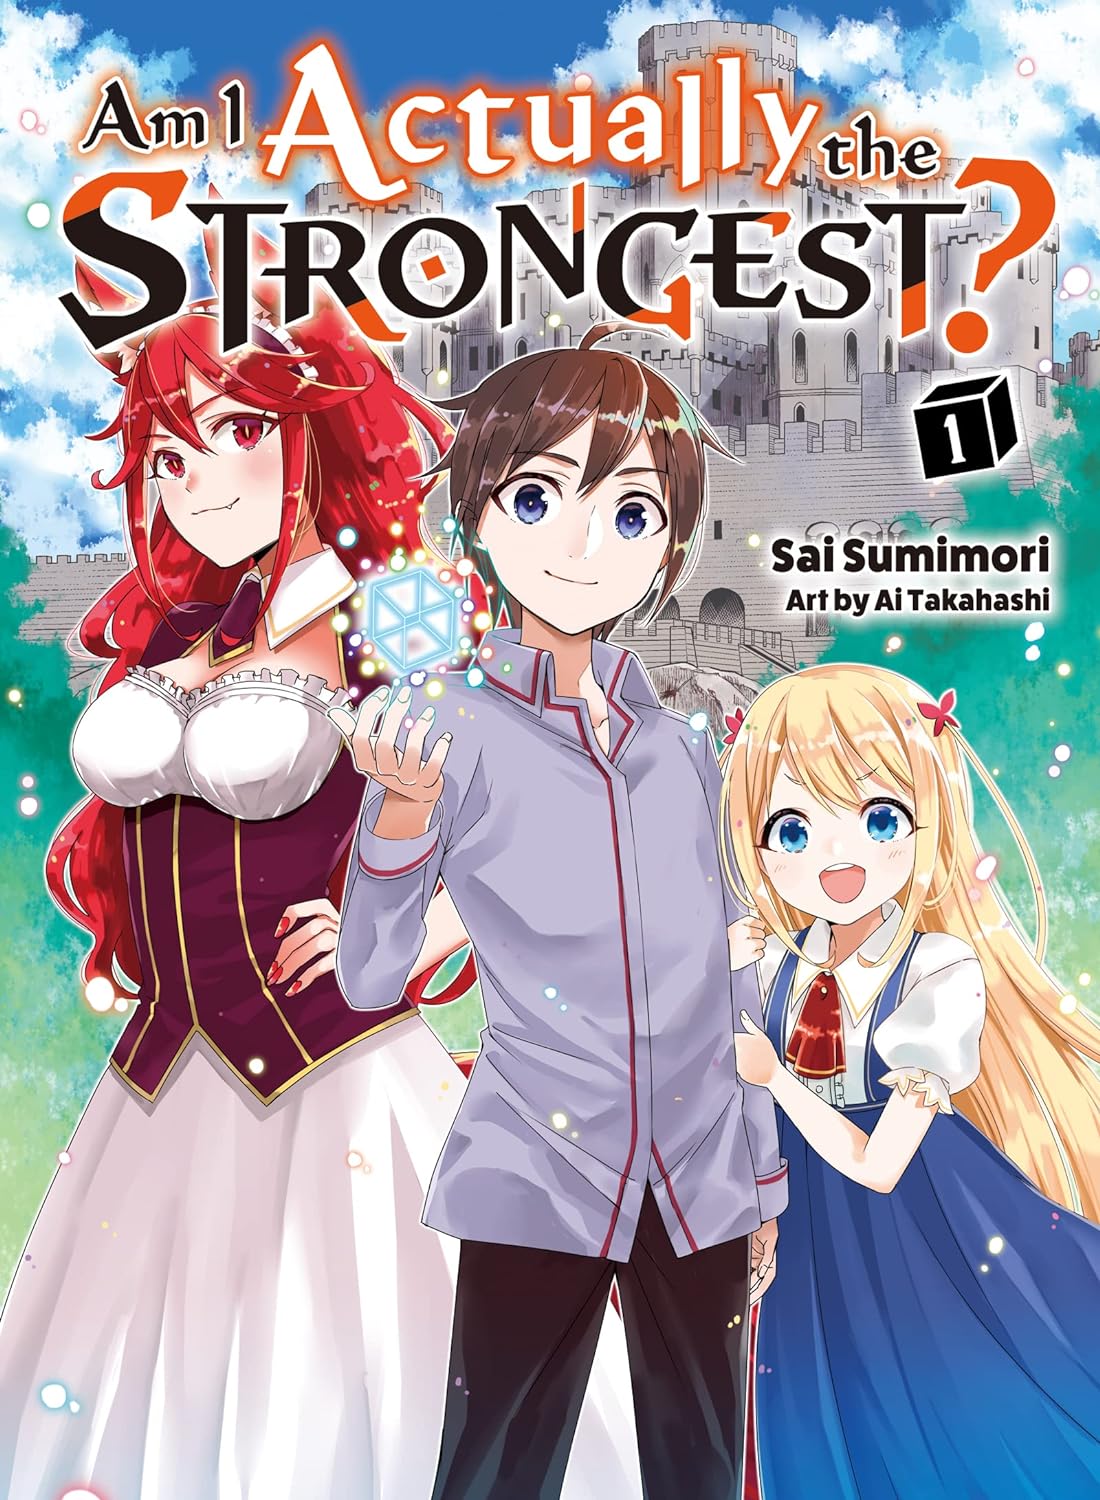 Am I Actually the Strongest? (Light Novel)